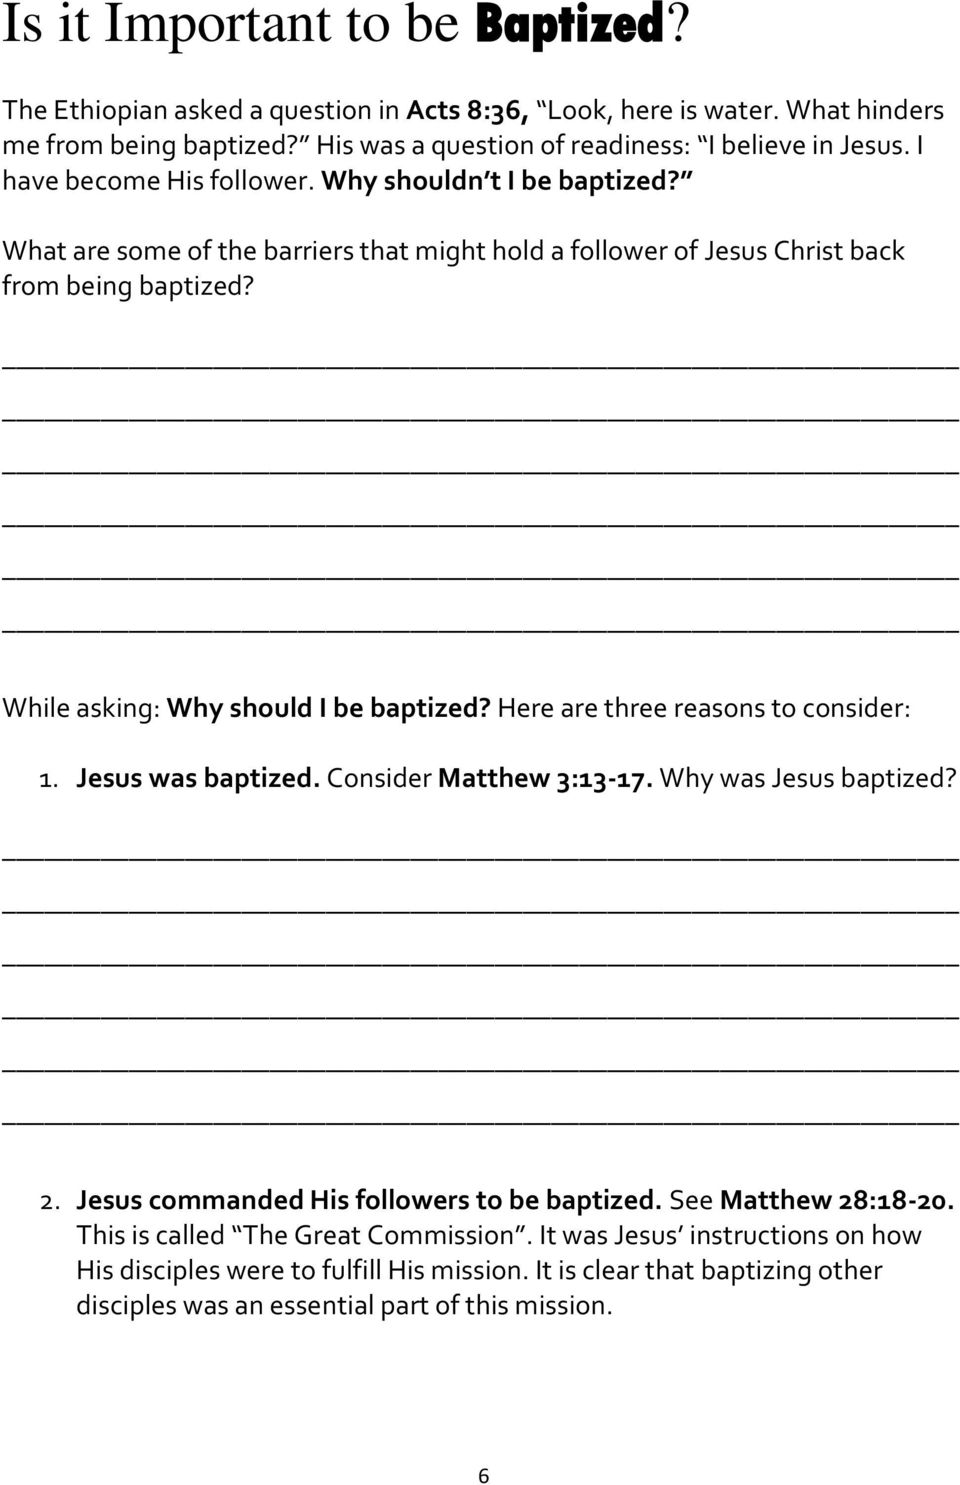 While asking: Why should I be baptized? Here are three reasons to consider: 1. Jesus was baptized. Consider Matthew 3:13-17. Why was Jesus baptized? 2.